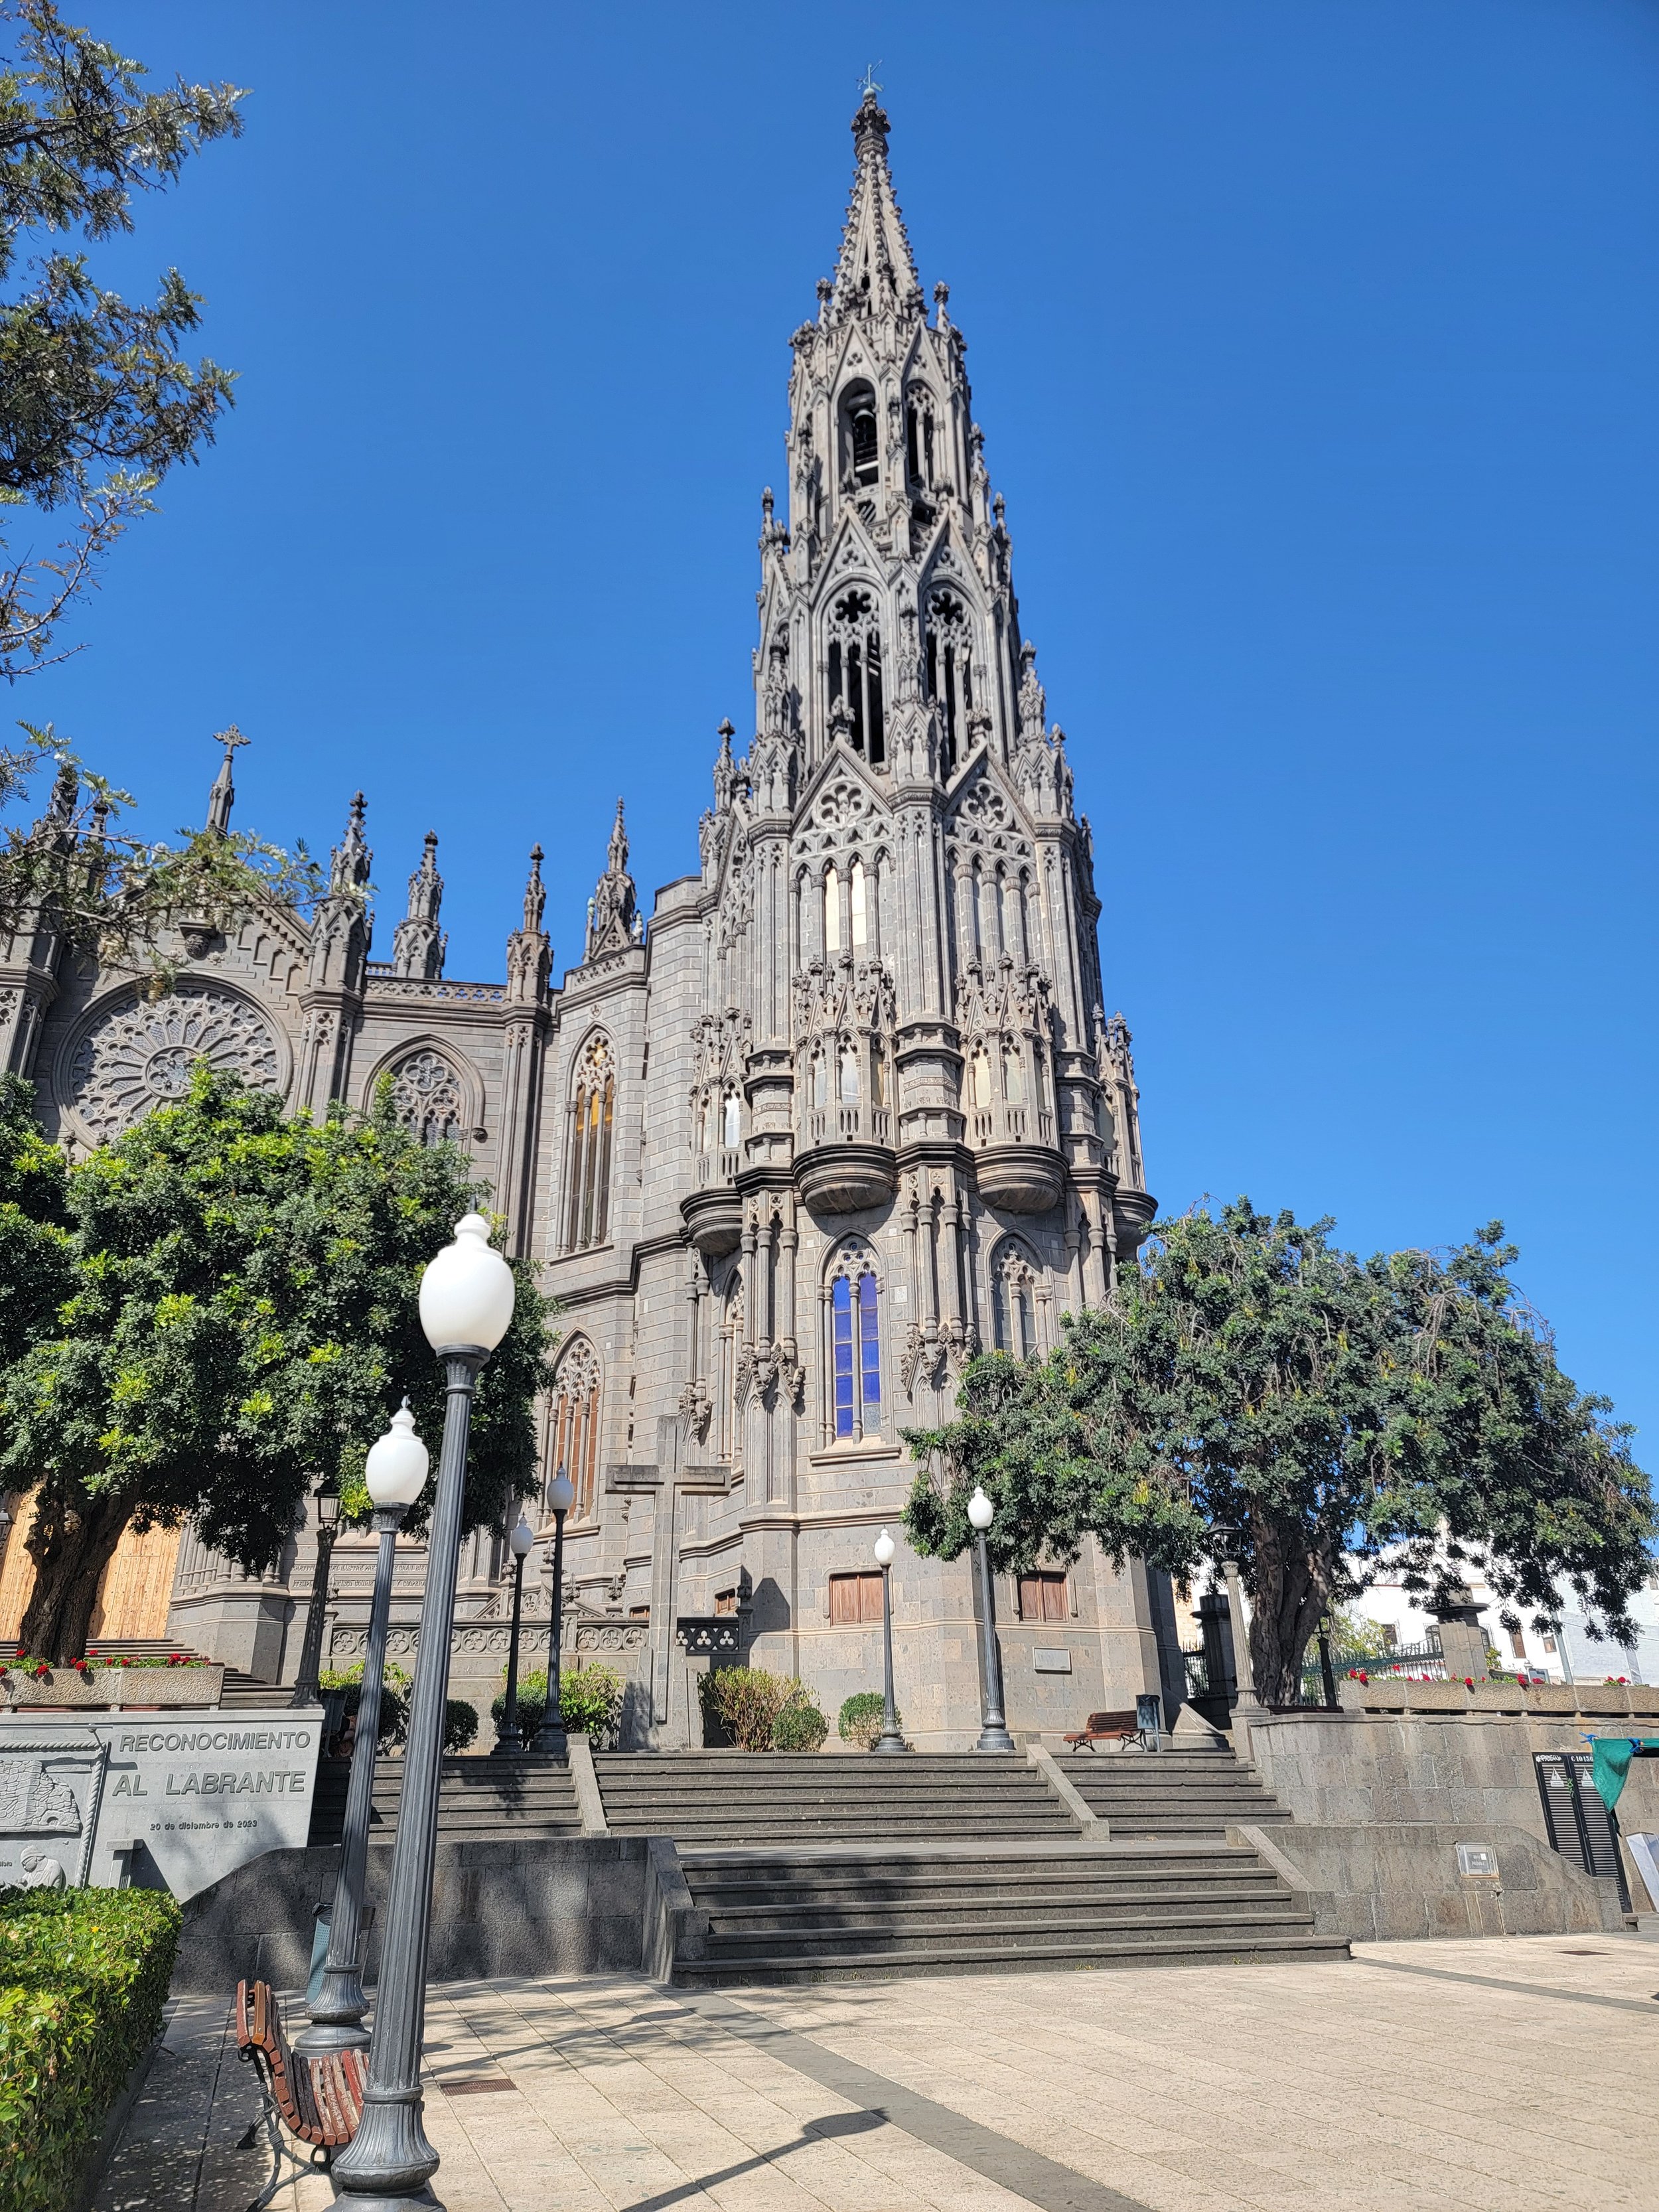 Further down in Arucas you can find the towering San Juan de Bautista. You really can't miss it.